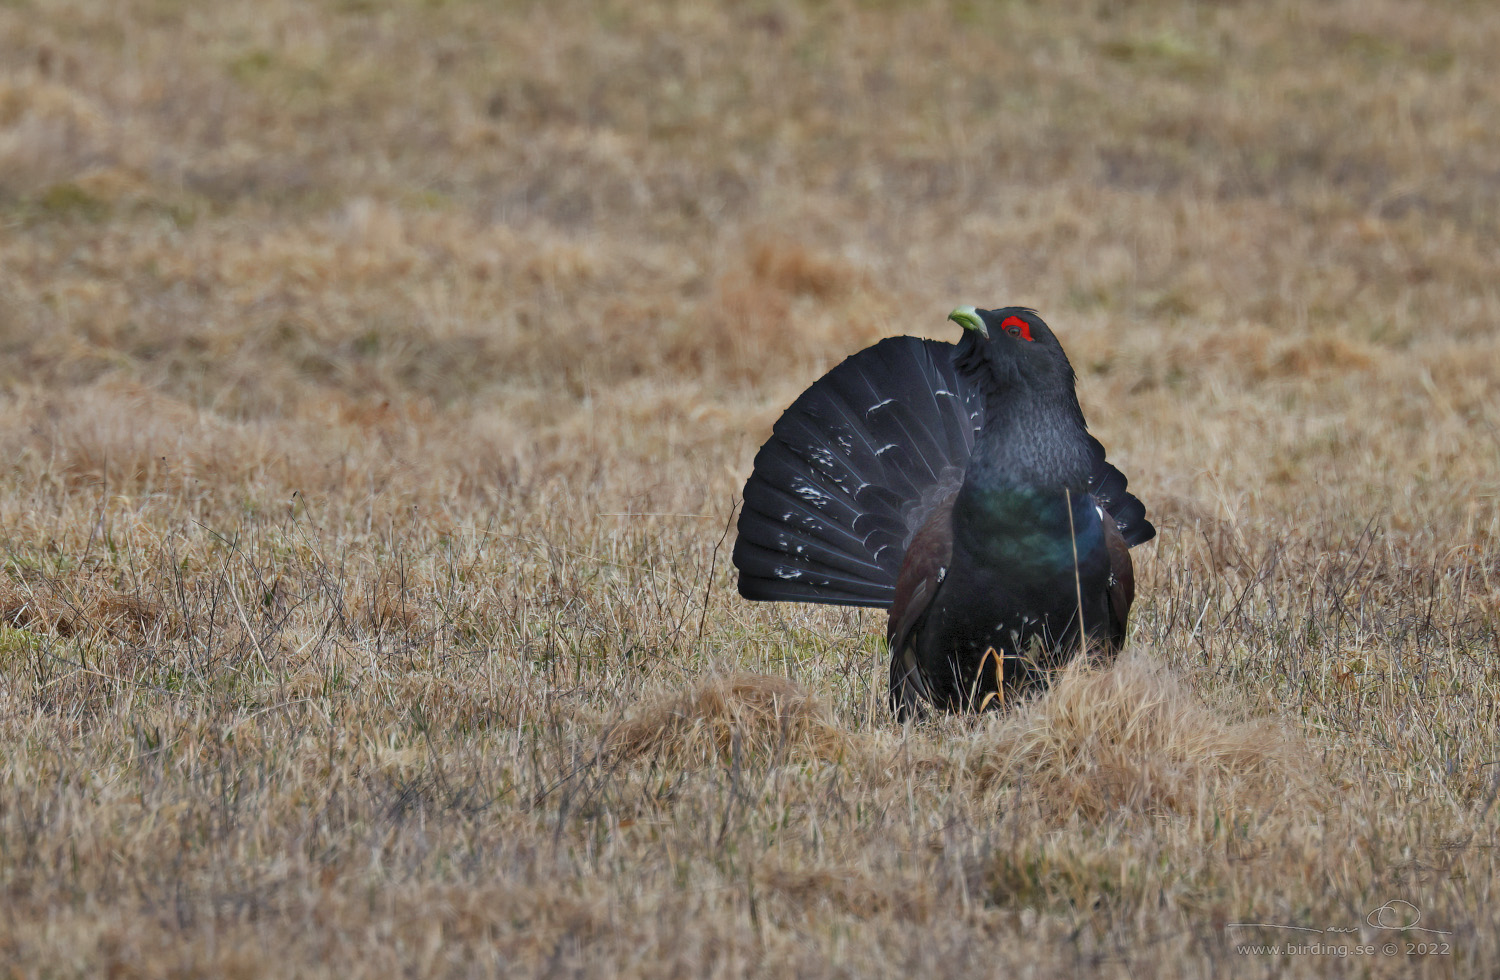 TJDER / WESTERN CAPERCAILLIE (Tetrao urogallus) - Stng / Close